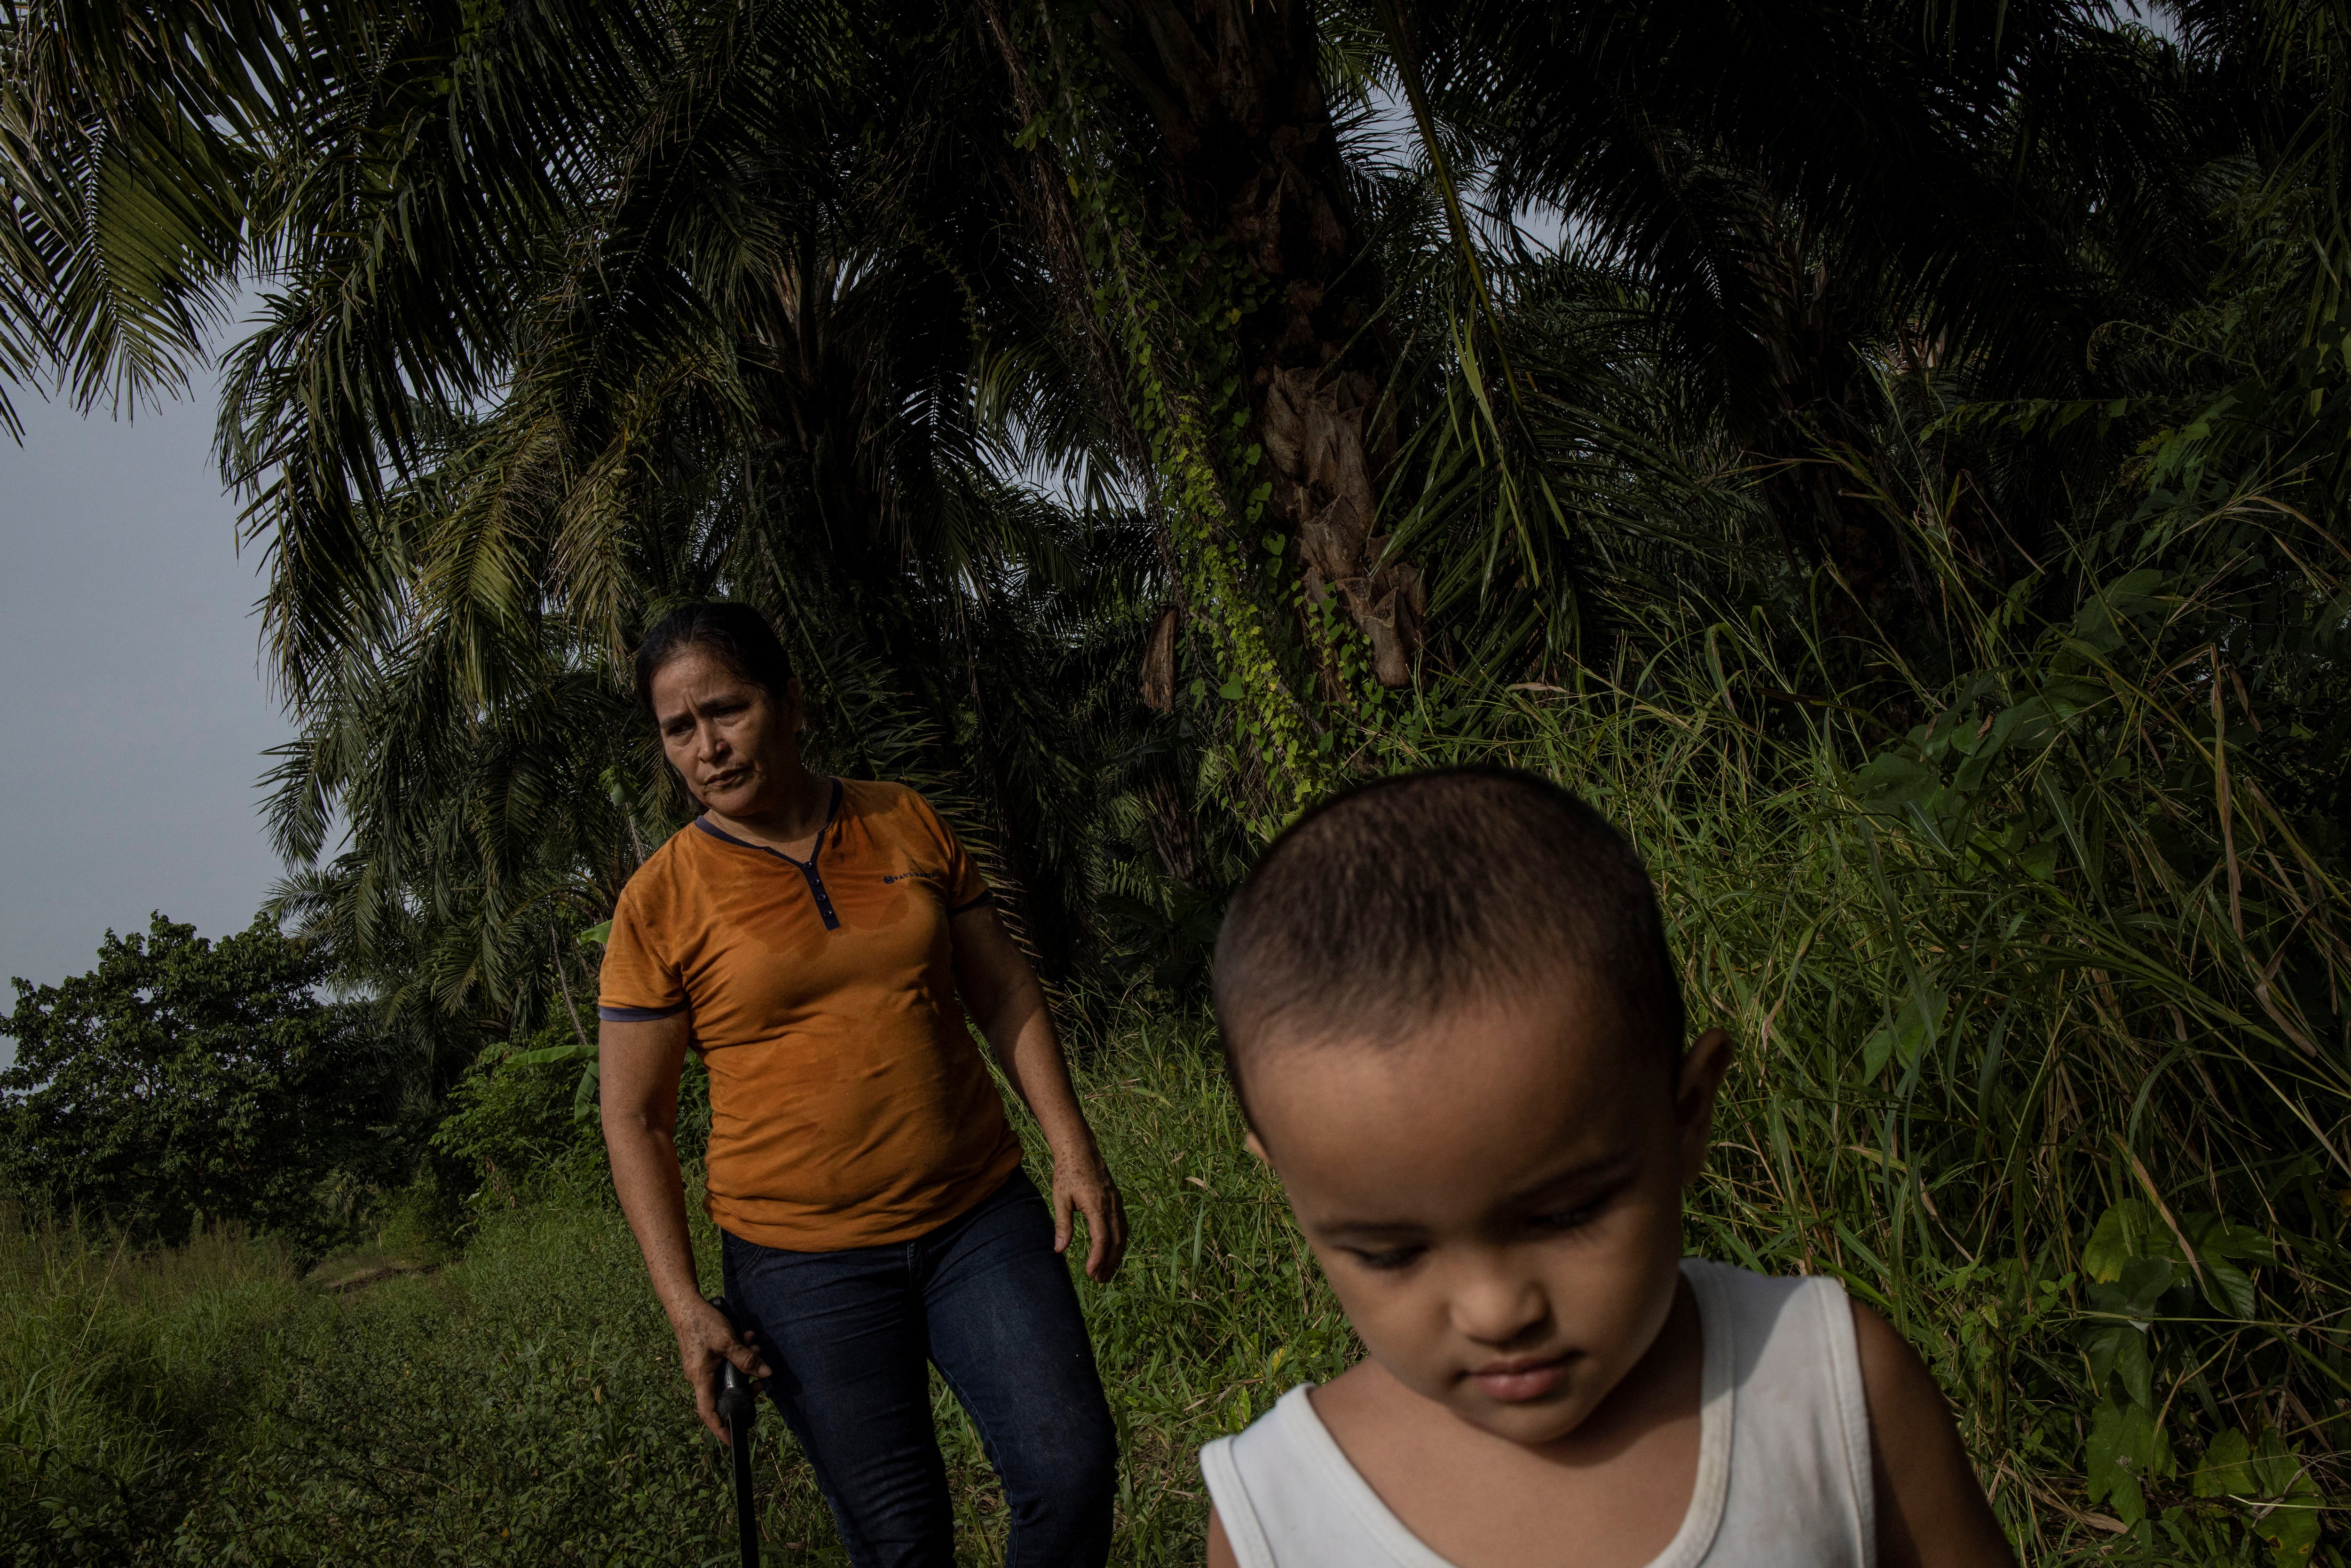 Maria, accompanied by her grandson Aron, arrives to work at a banana plantation in Honduras